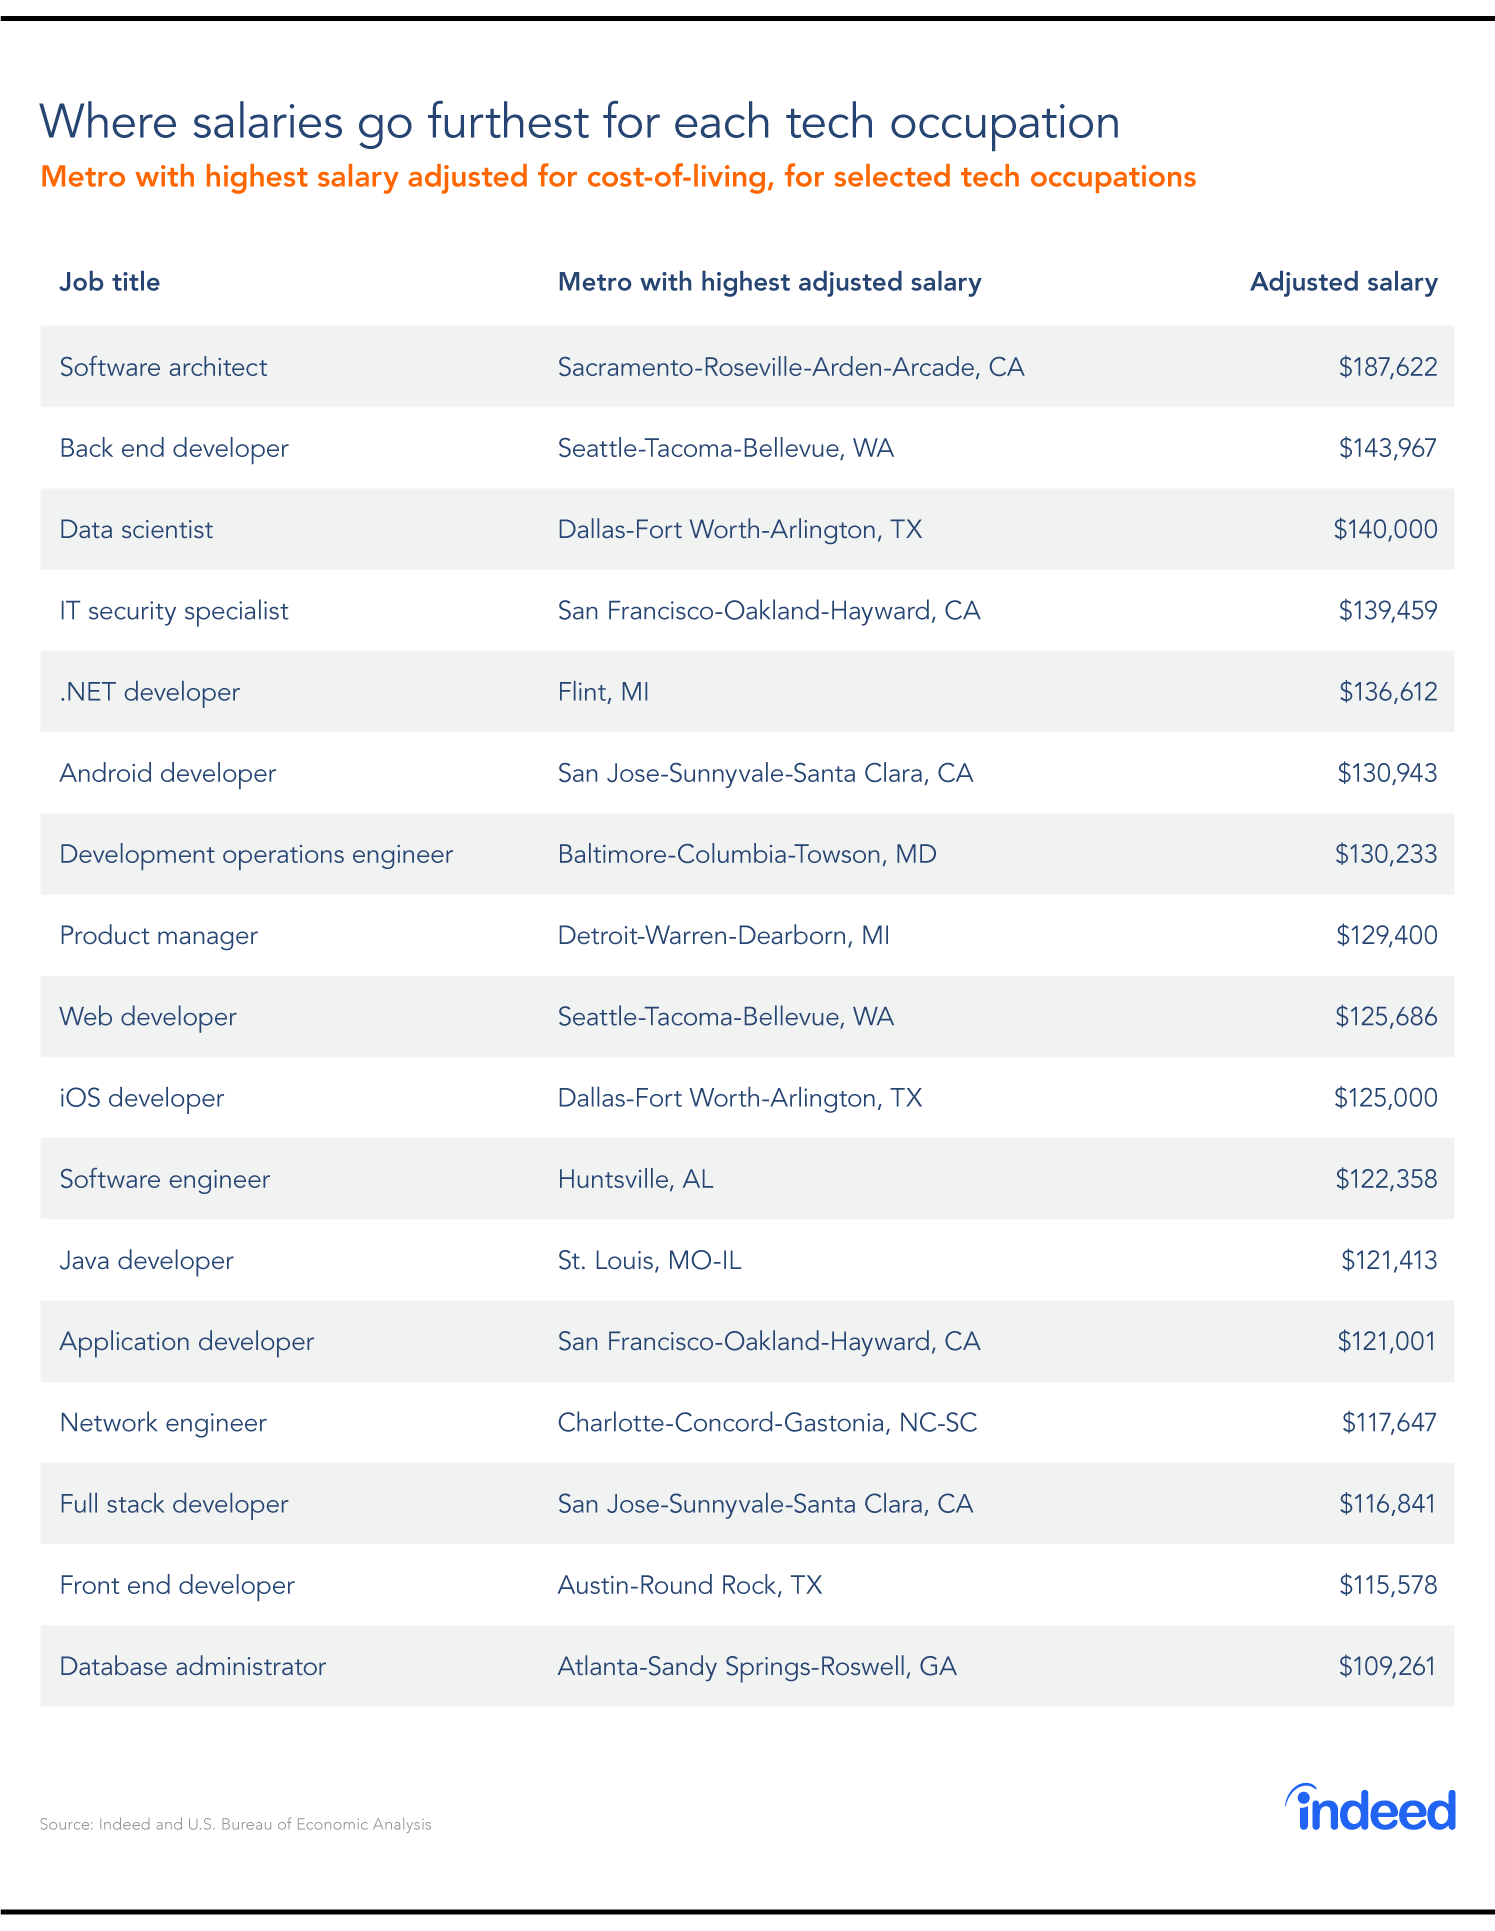 Where salaries go furthest for each tech occupation